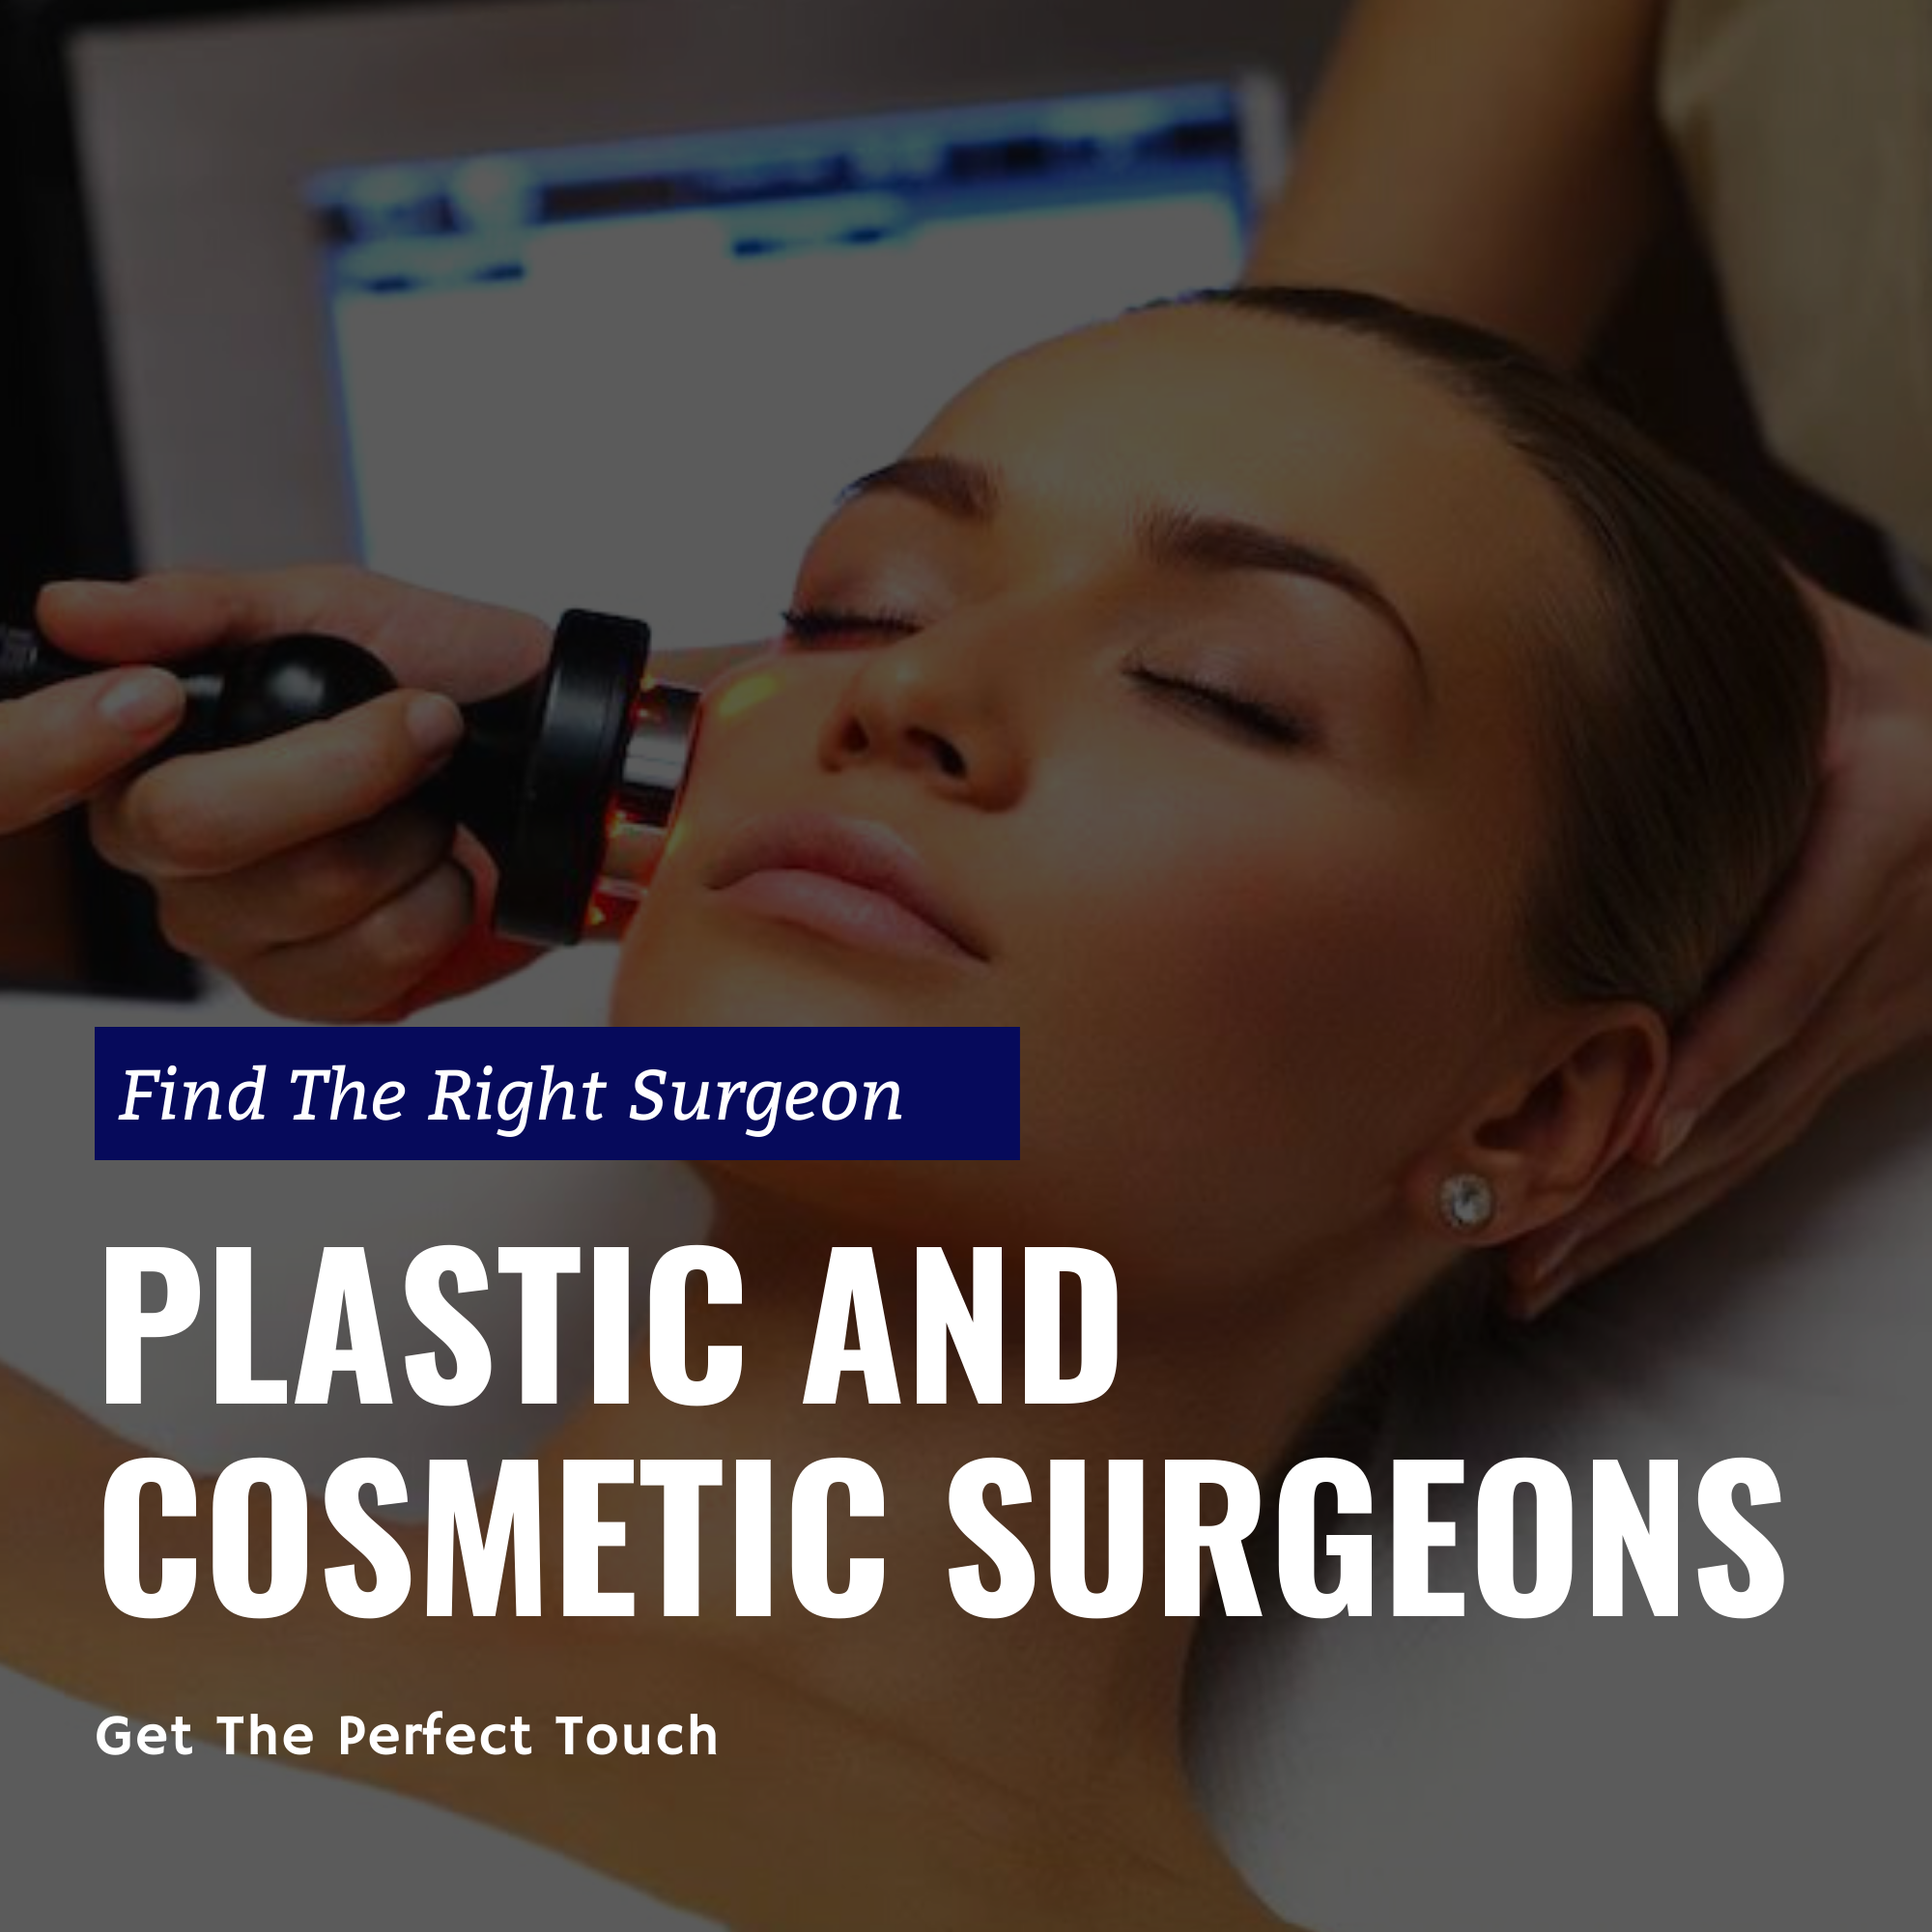 Plastic and cosmetic surgeons in India